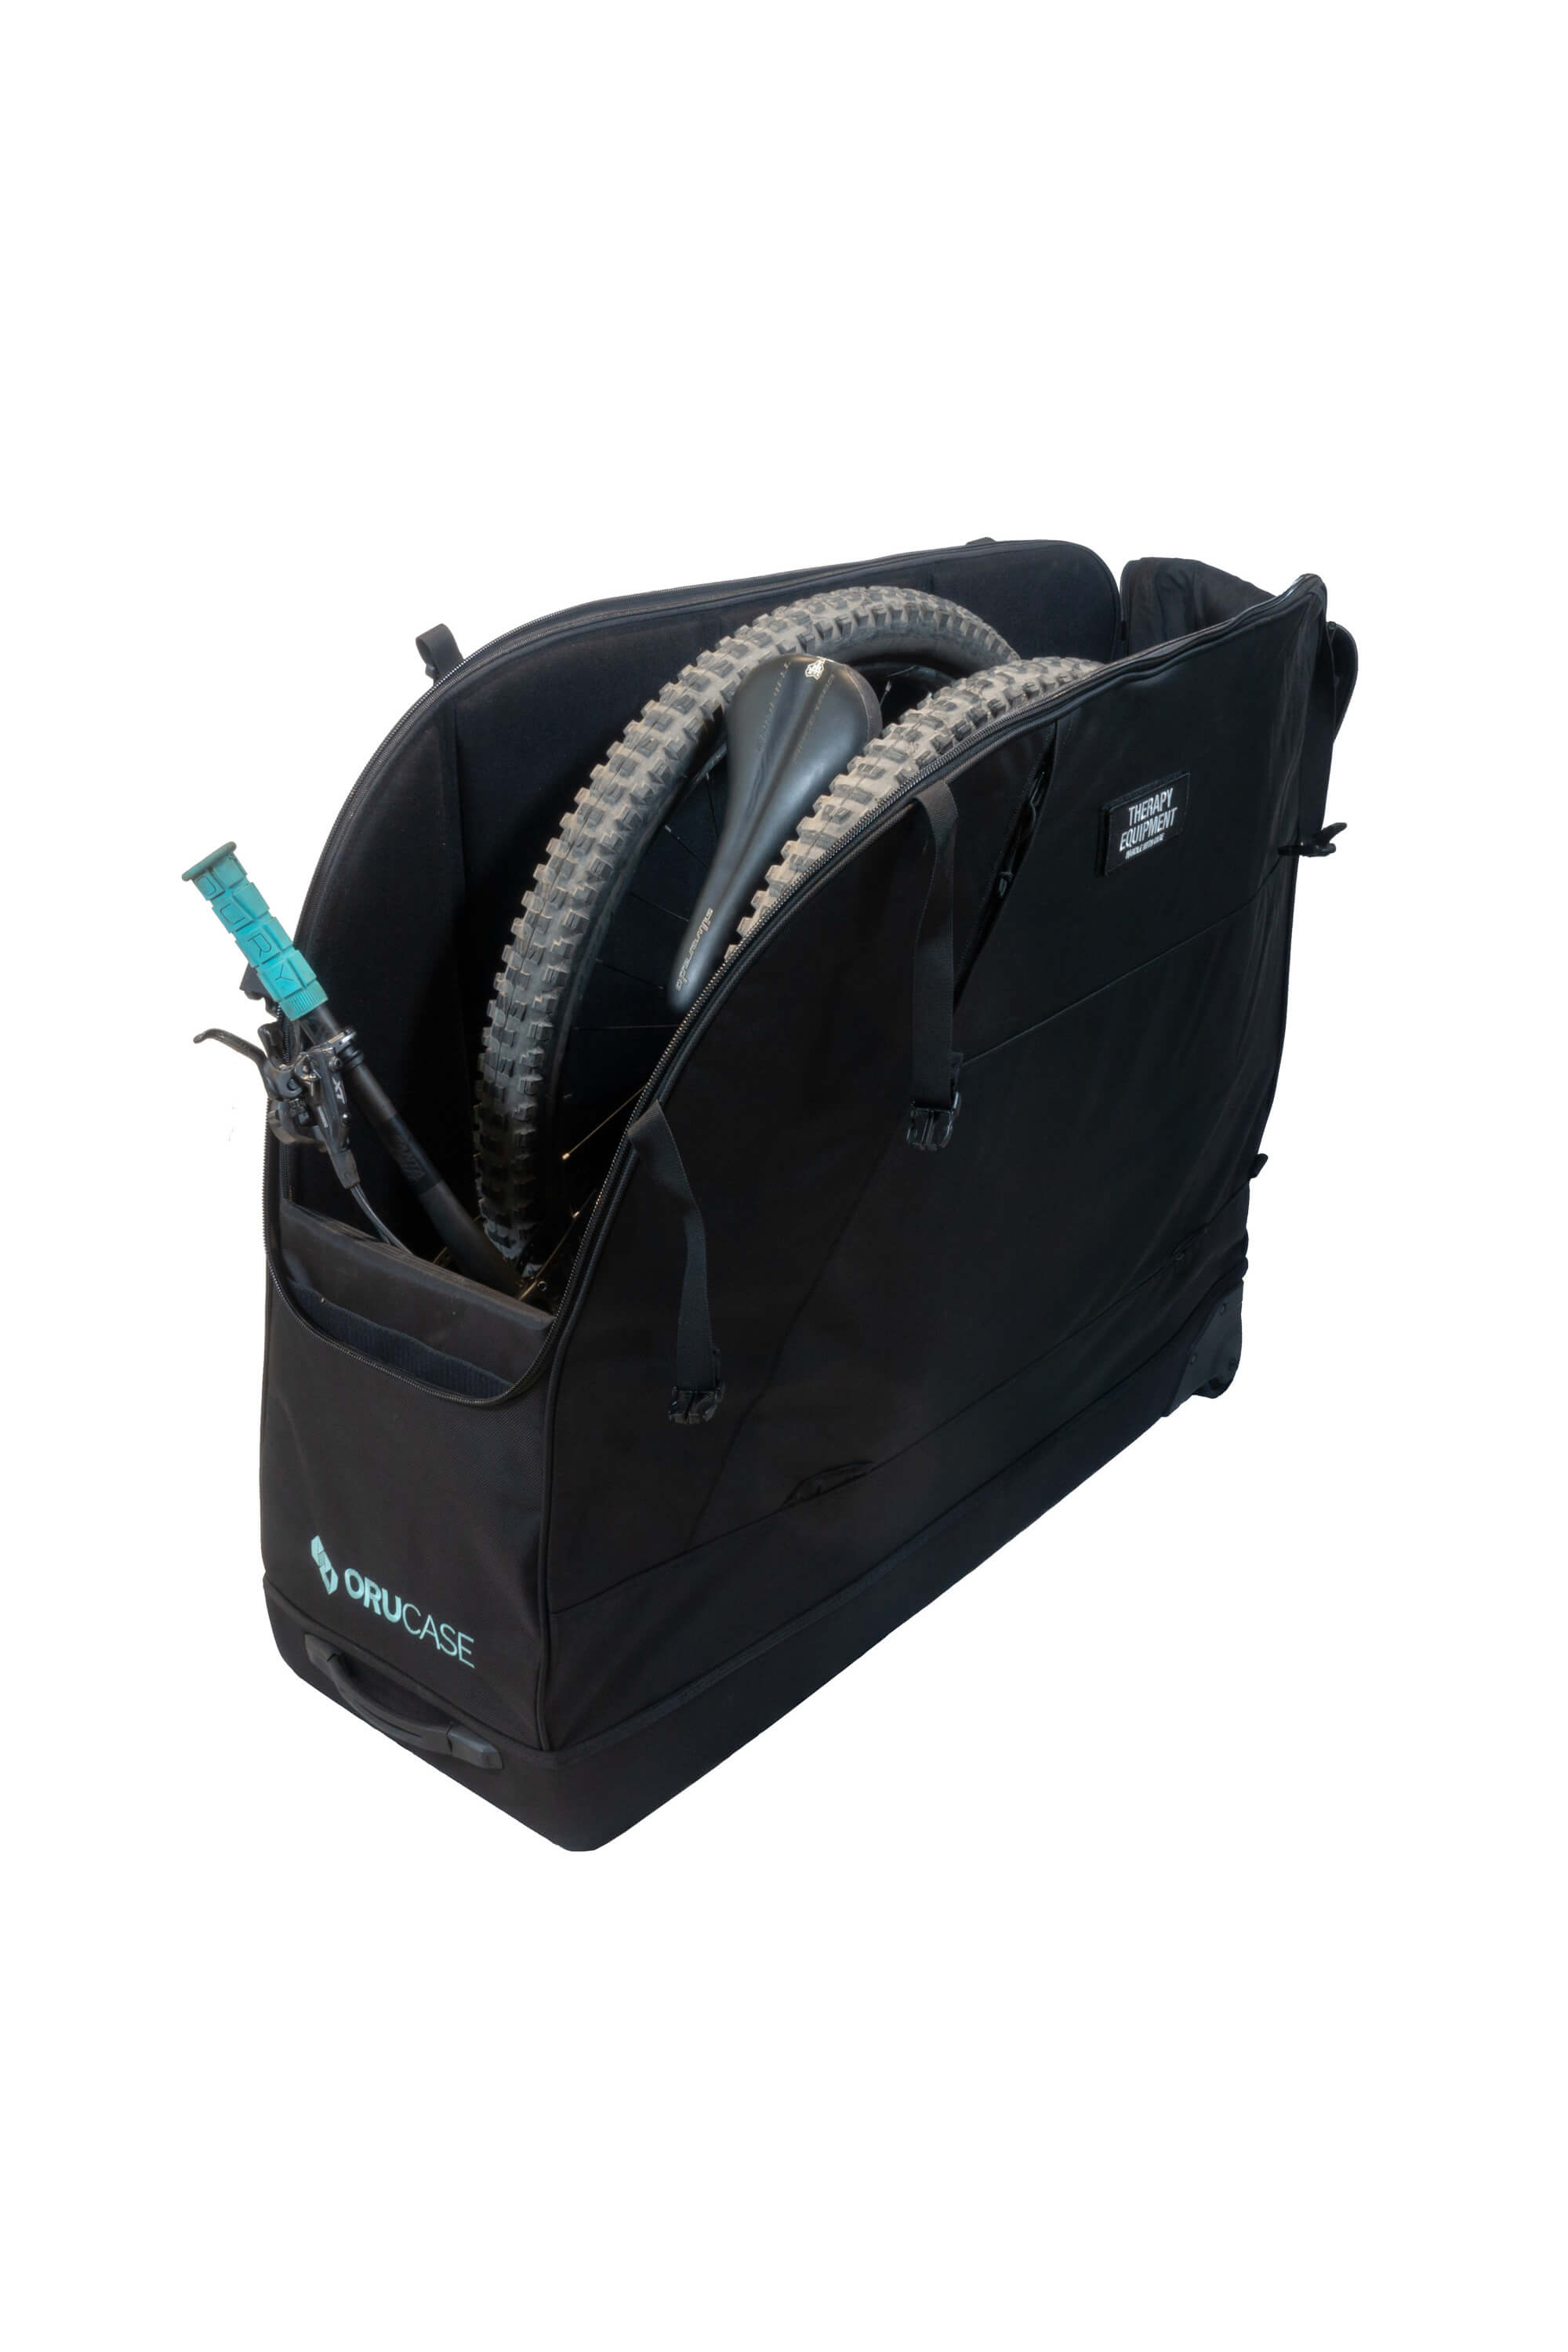 Buy TOP CASE WITH Q/R SYSTEM Bags & Travel Cases for Bicycles Shop Online